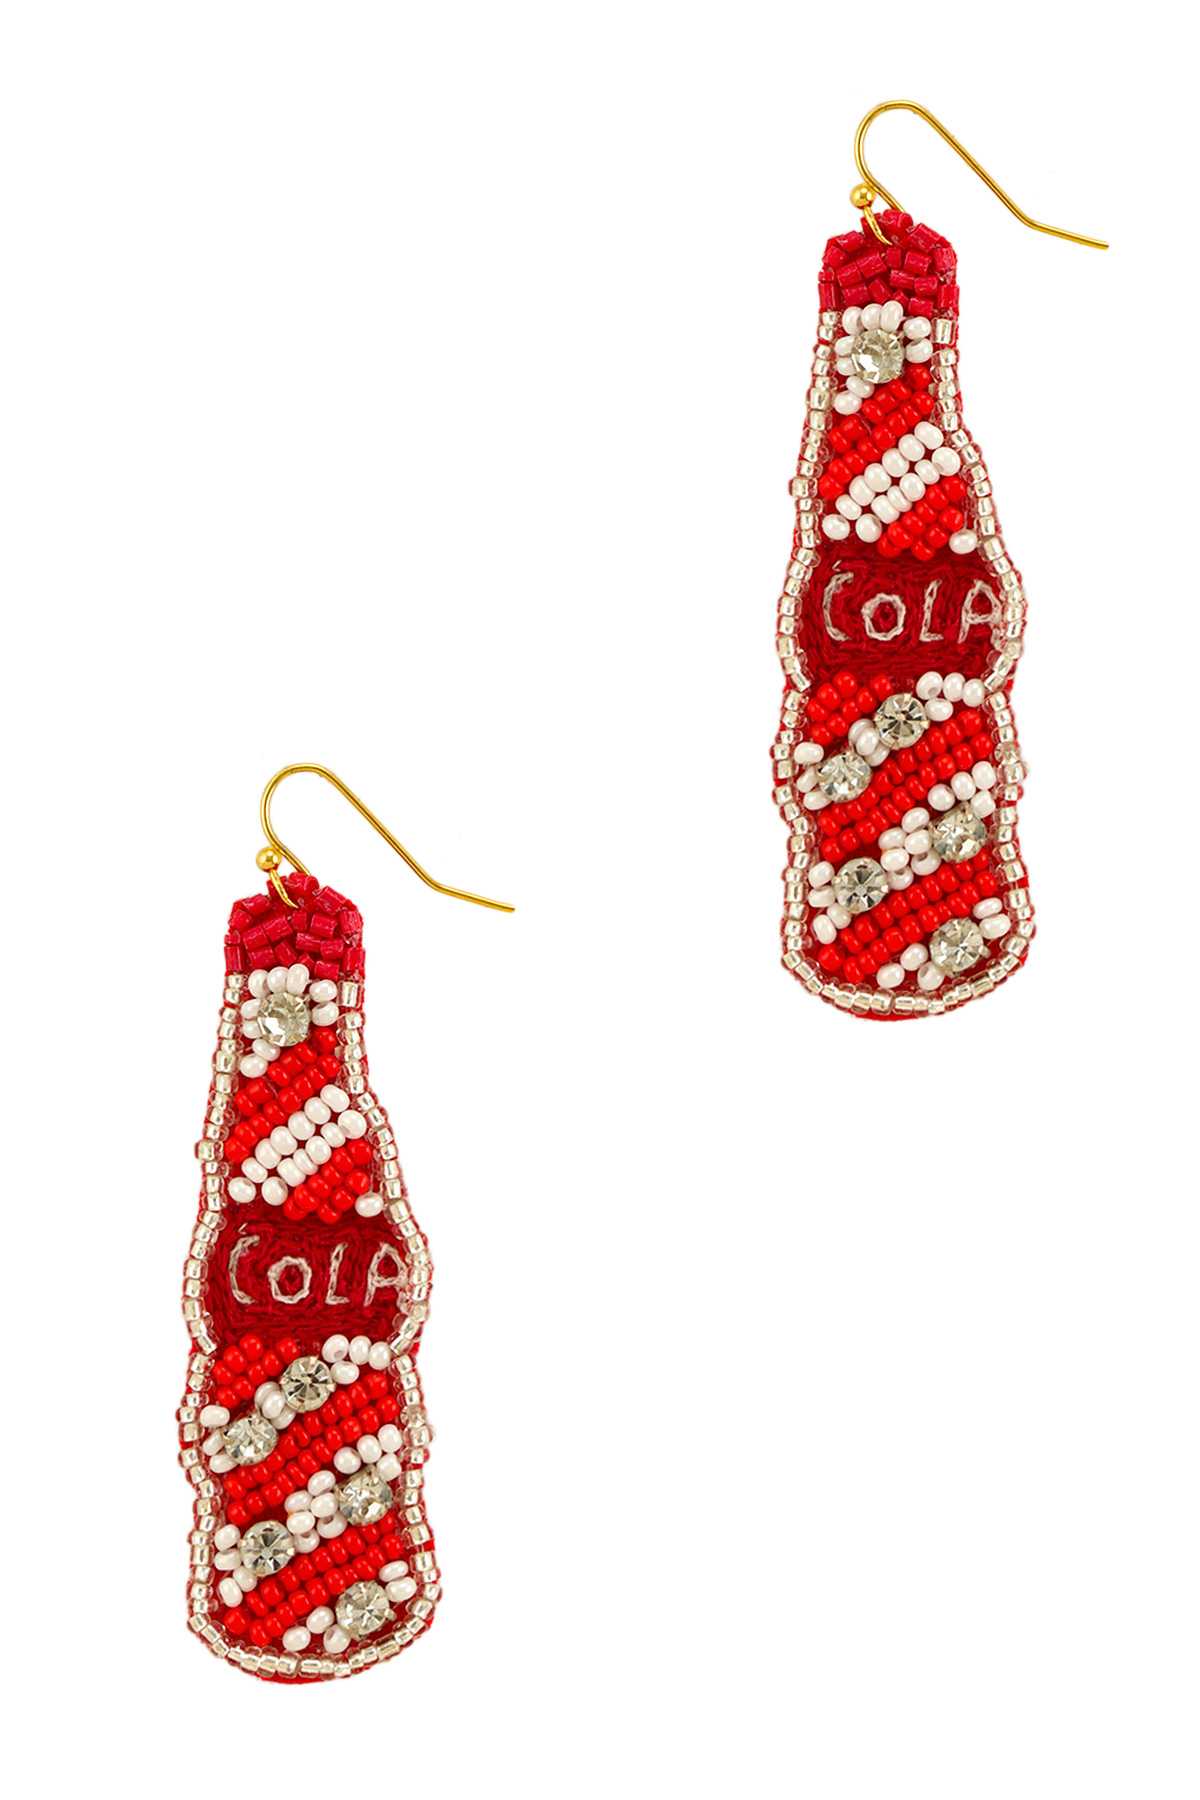 COLA Beads and Cubic Dangle Fish Hook Earring